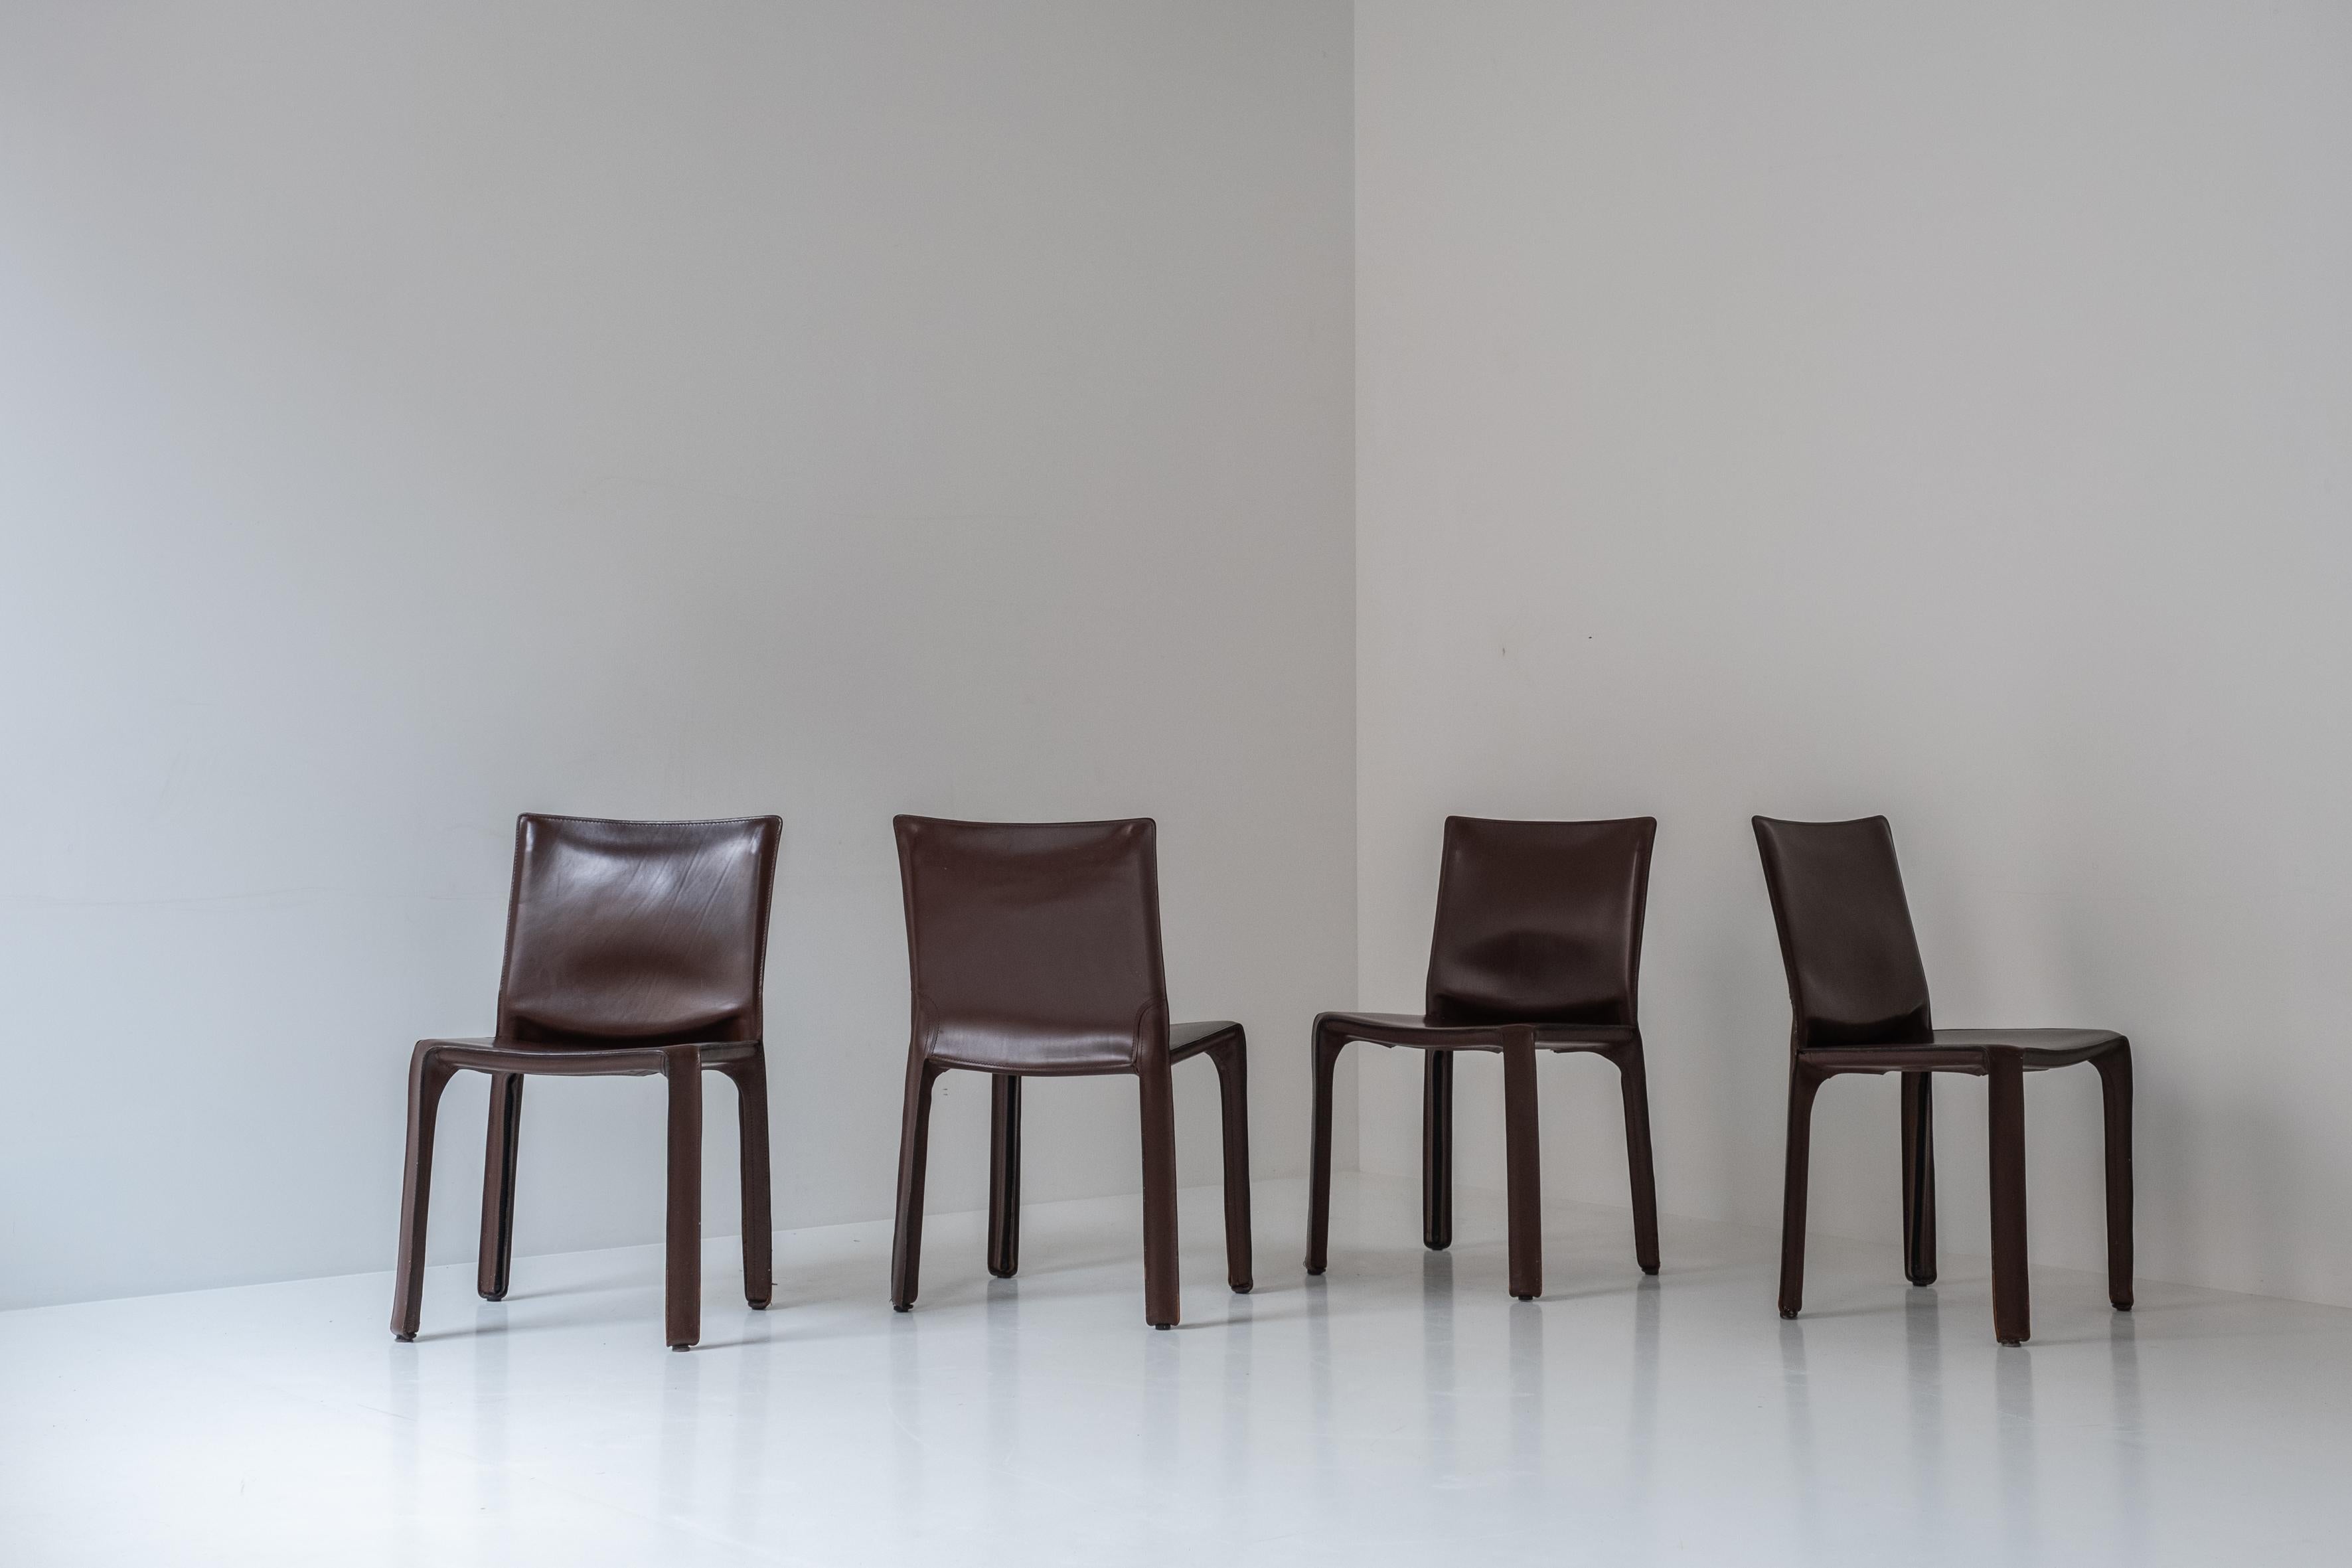 Set of four ‘413’ CAB dining chairs by Mario Bellini for Cassina, Italy 1977. These chairs features a handstitched brown leather upholstery wrapped over an internal steel frame. Well presented original condition with a nice overall patina. Labeled